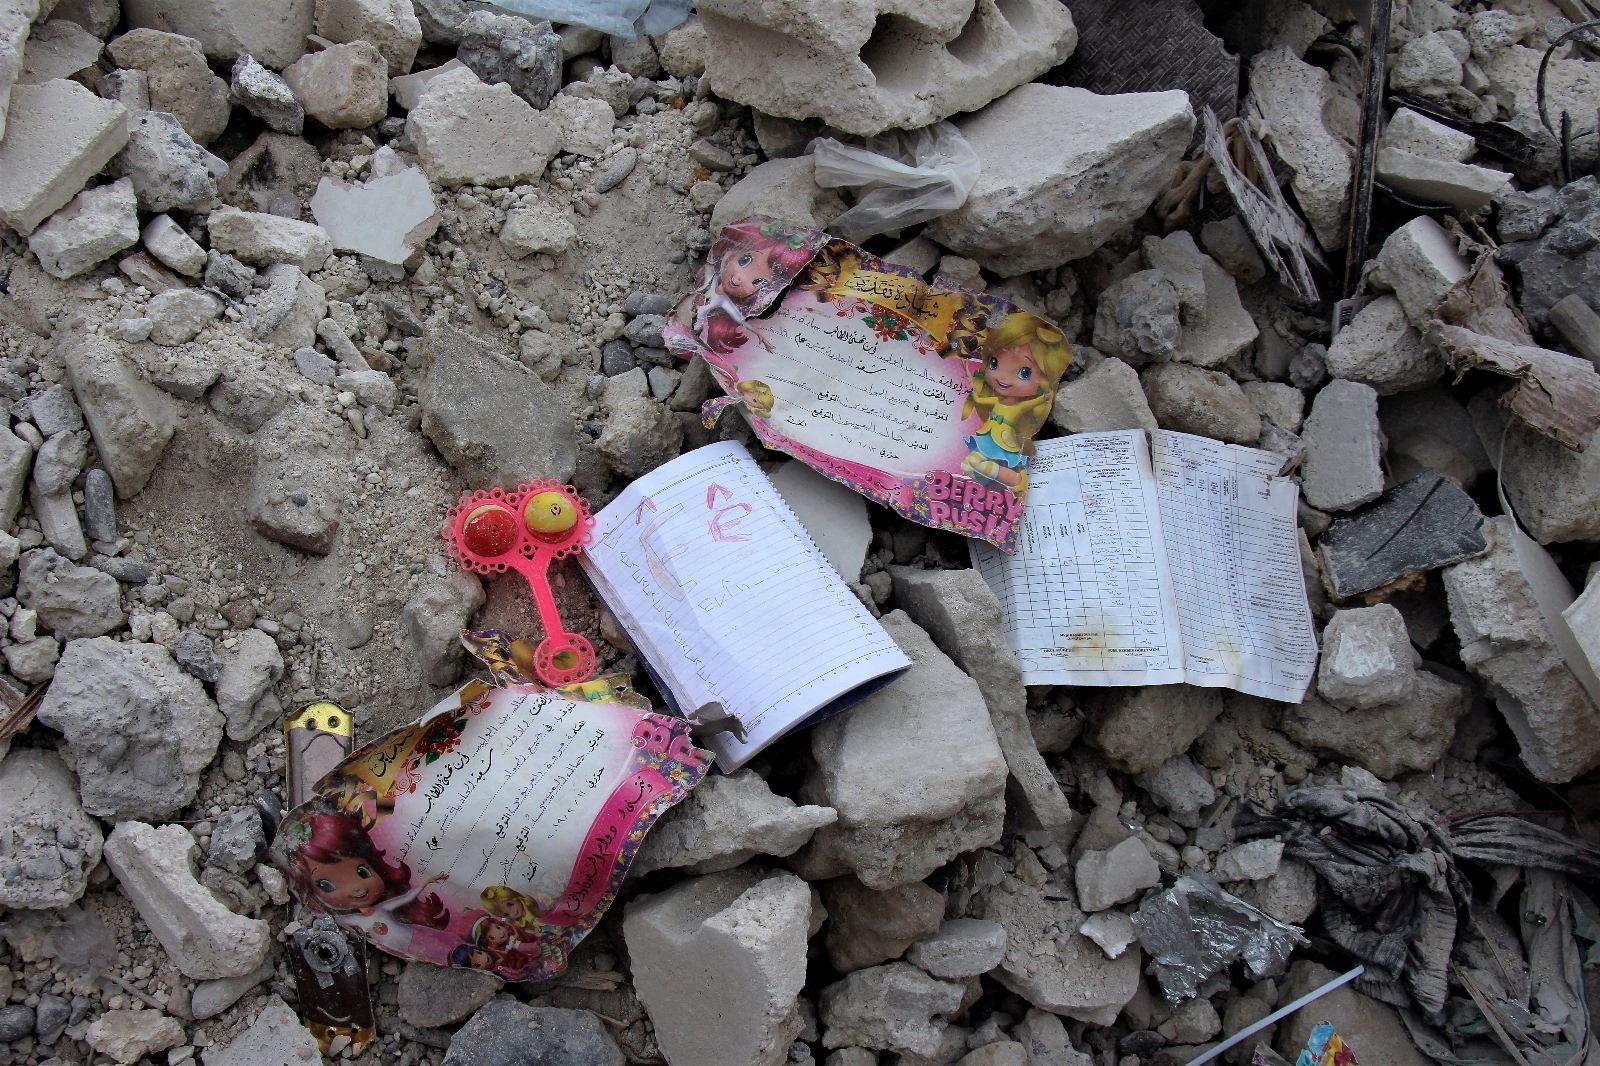 School books and certificates found by White Helmets members lay on the rubble, in the aftermath of an earthquake, Jandaris, Syria, Feb. 10, 2023. (Reuters Photo)